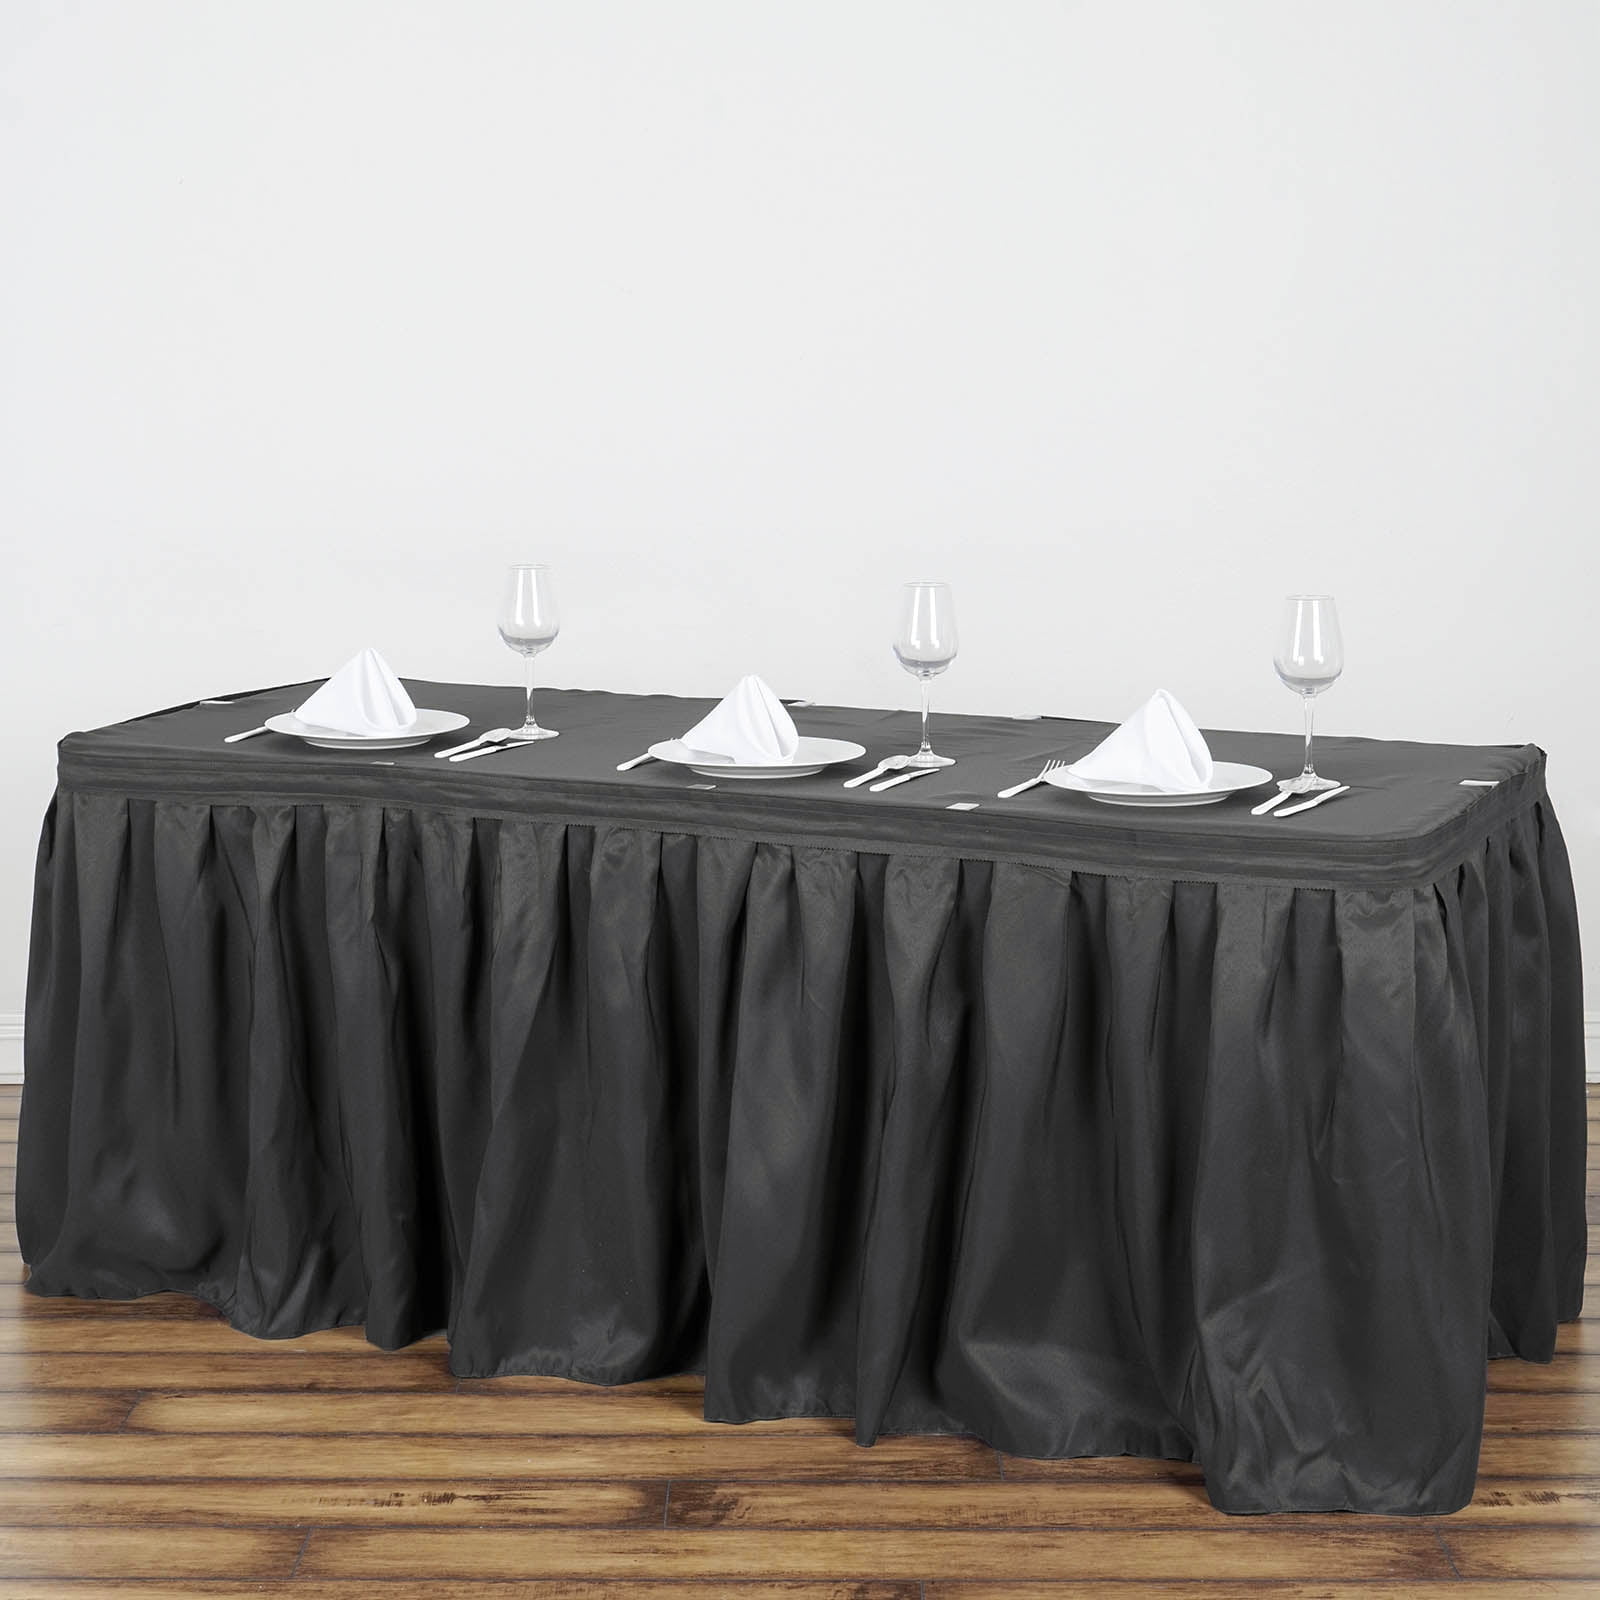 17 ft x 29" Table Skirt Banquet Wedding Party Linens Polyester BLACK No Top 